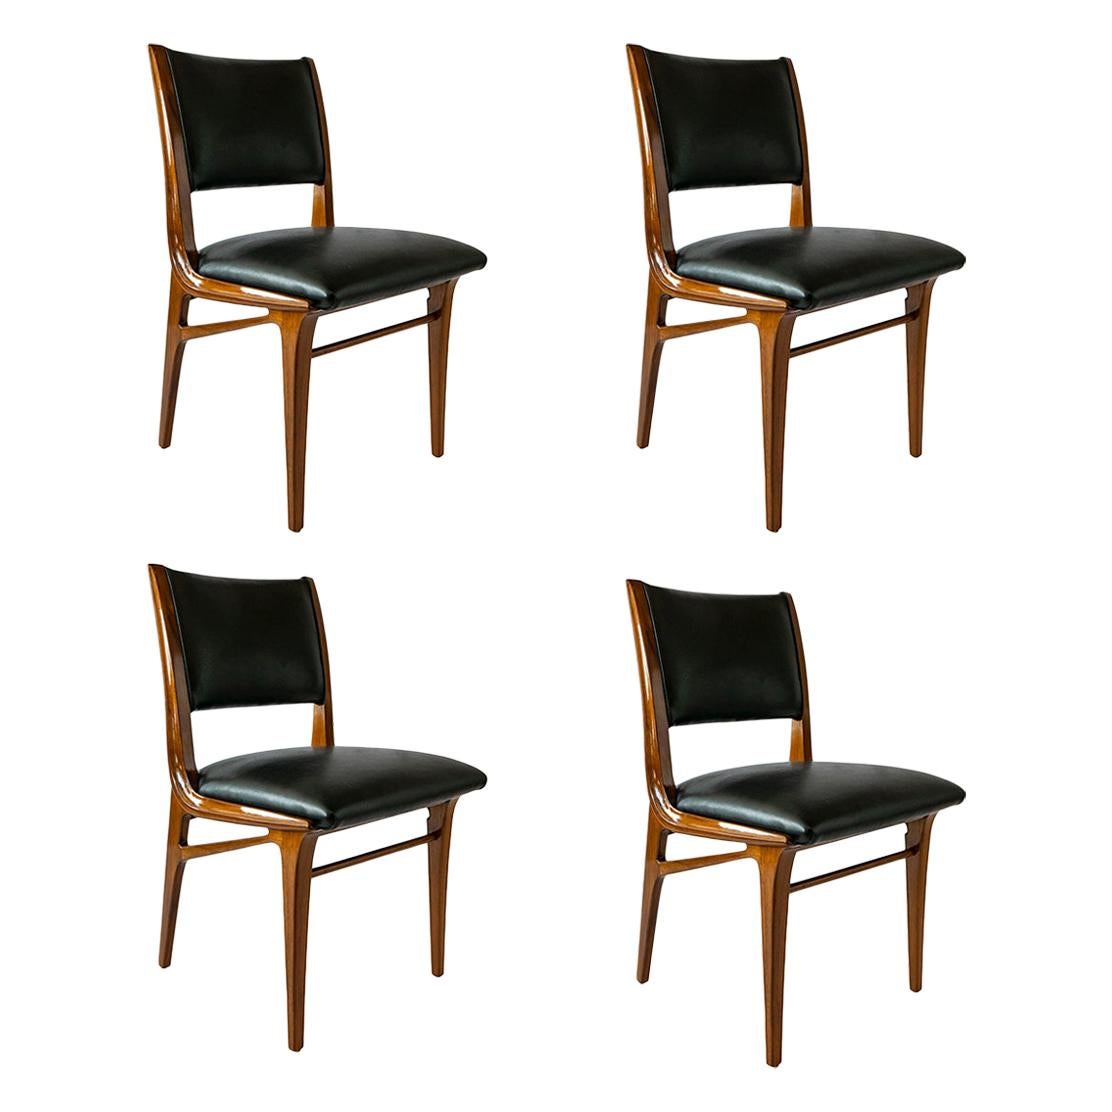 Set of 4 Italian Modern Walnut Dining/Side Chairs, Attributed to Campo & Graffi